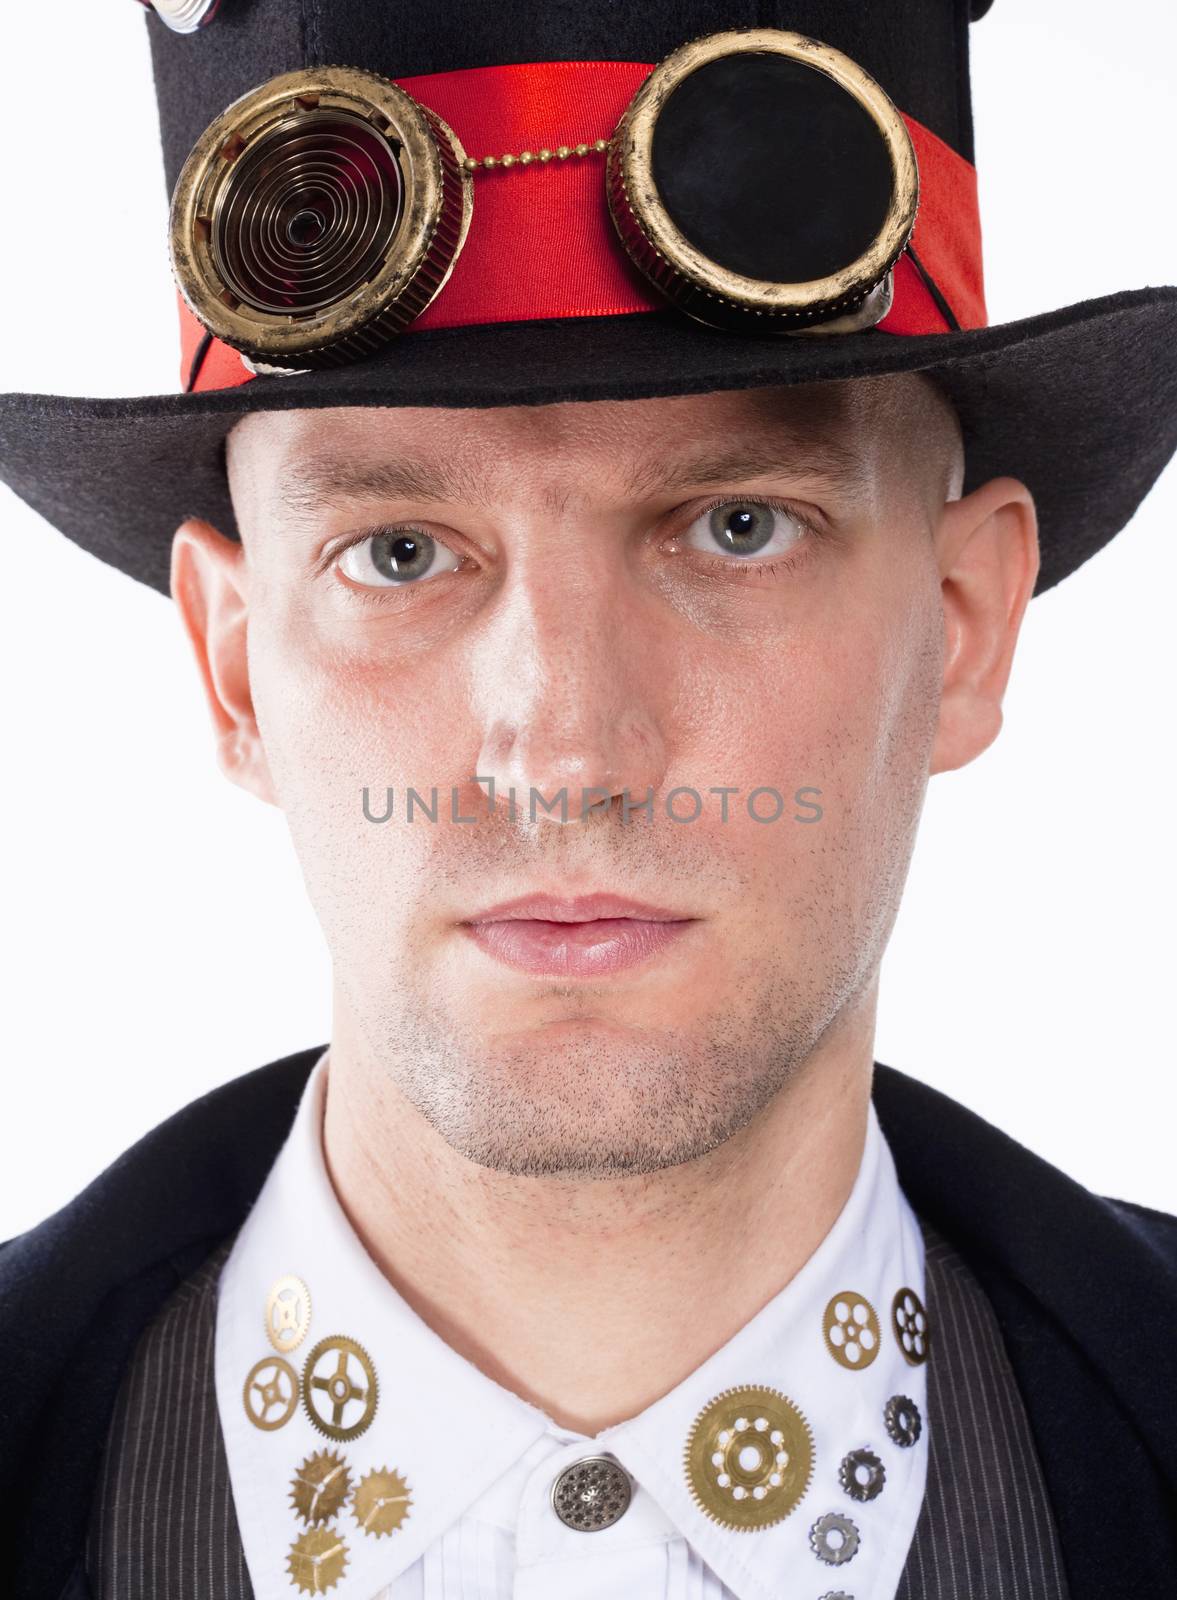 Portrait of a Magician with High Hat and Clock Parts Details